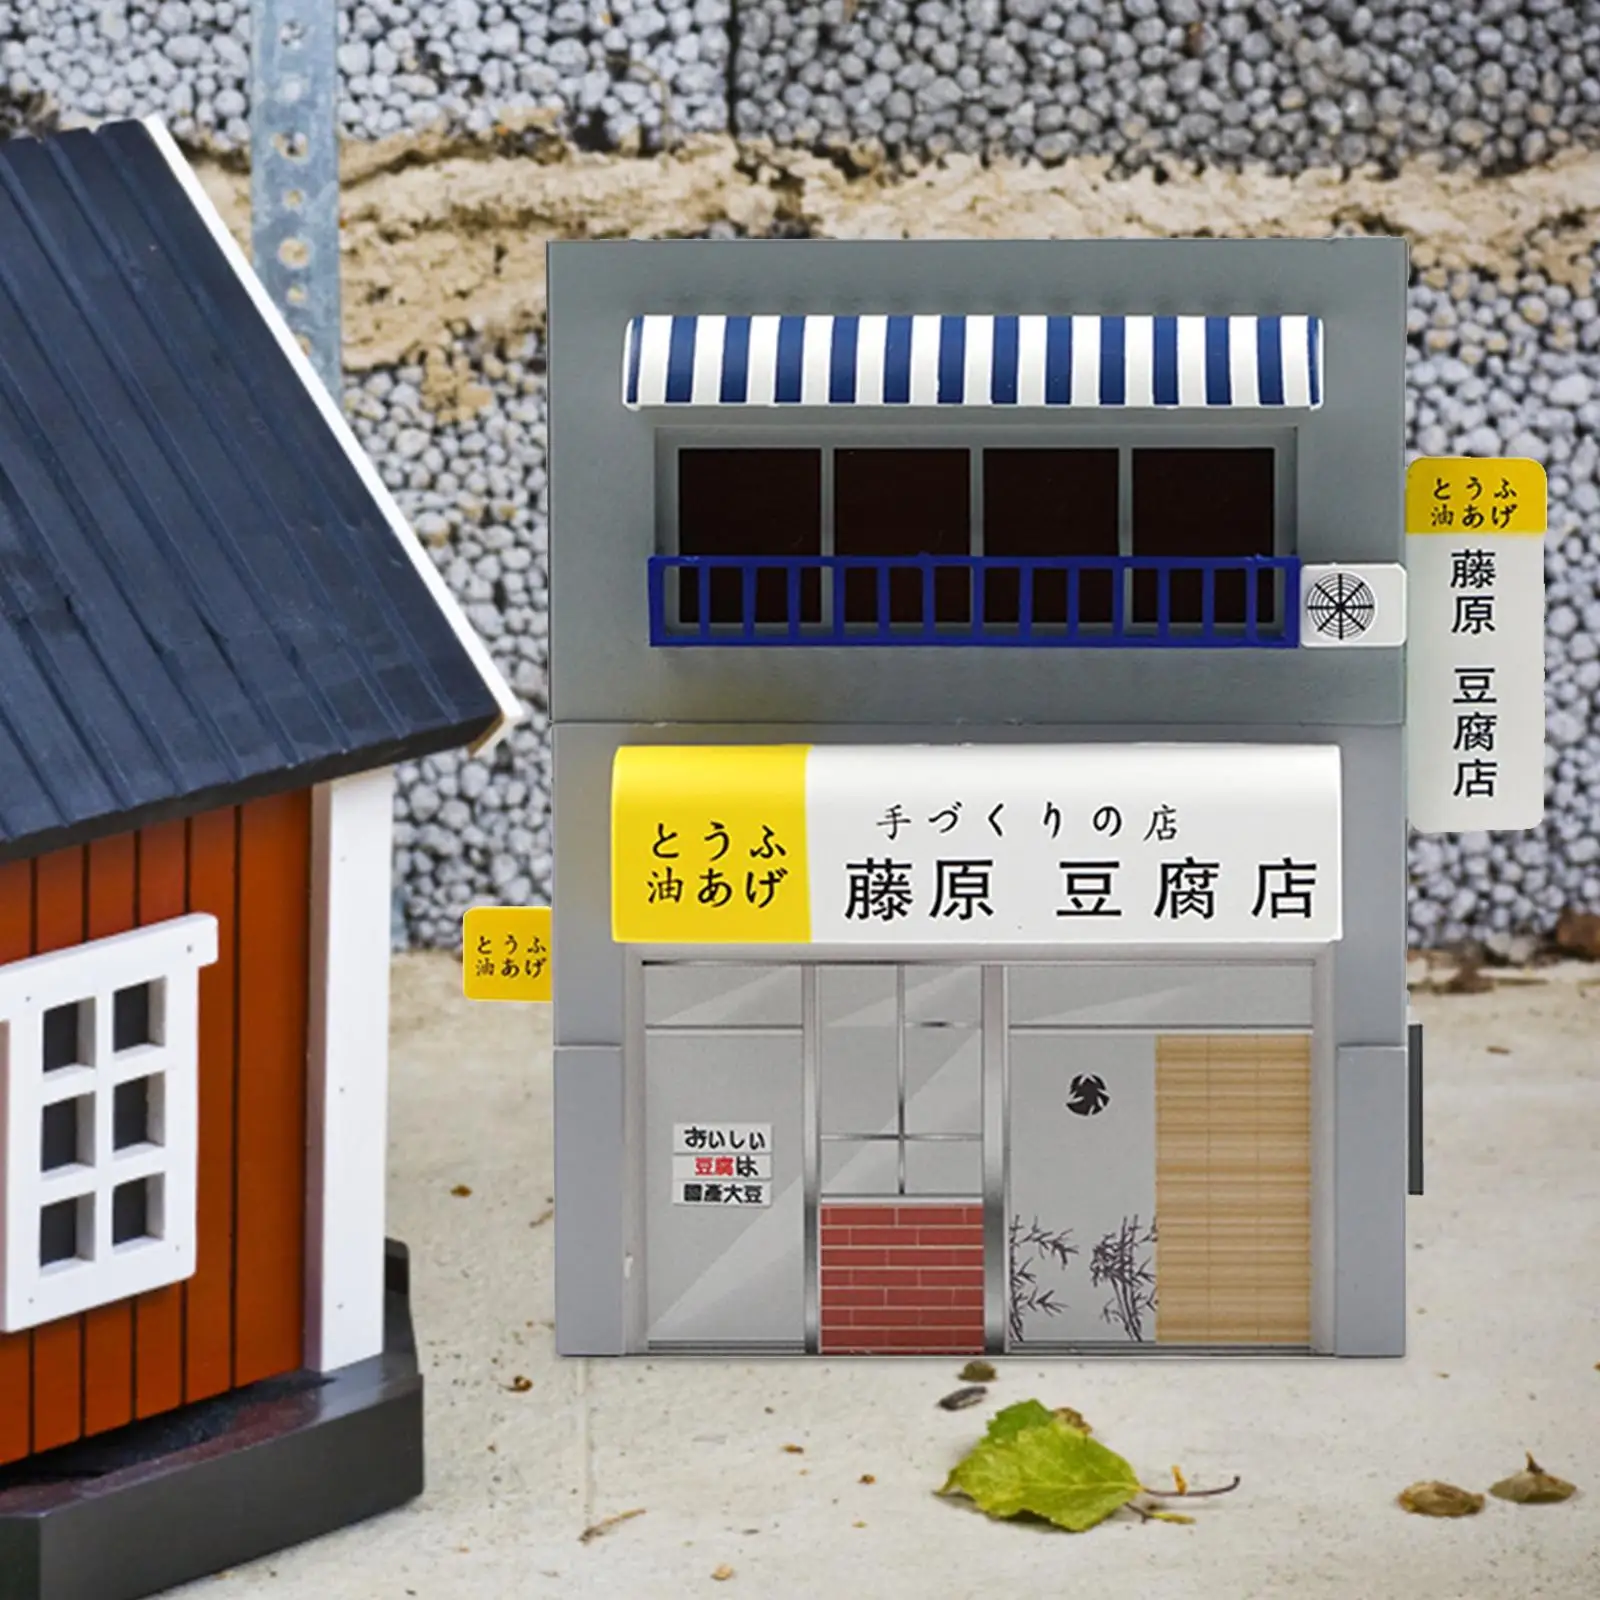 1:64 Scale Tofu Shop Diorama Model S Gauge Sand Table Desktop Collection Movie Props Layout Scenery Scenery Store Decoration